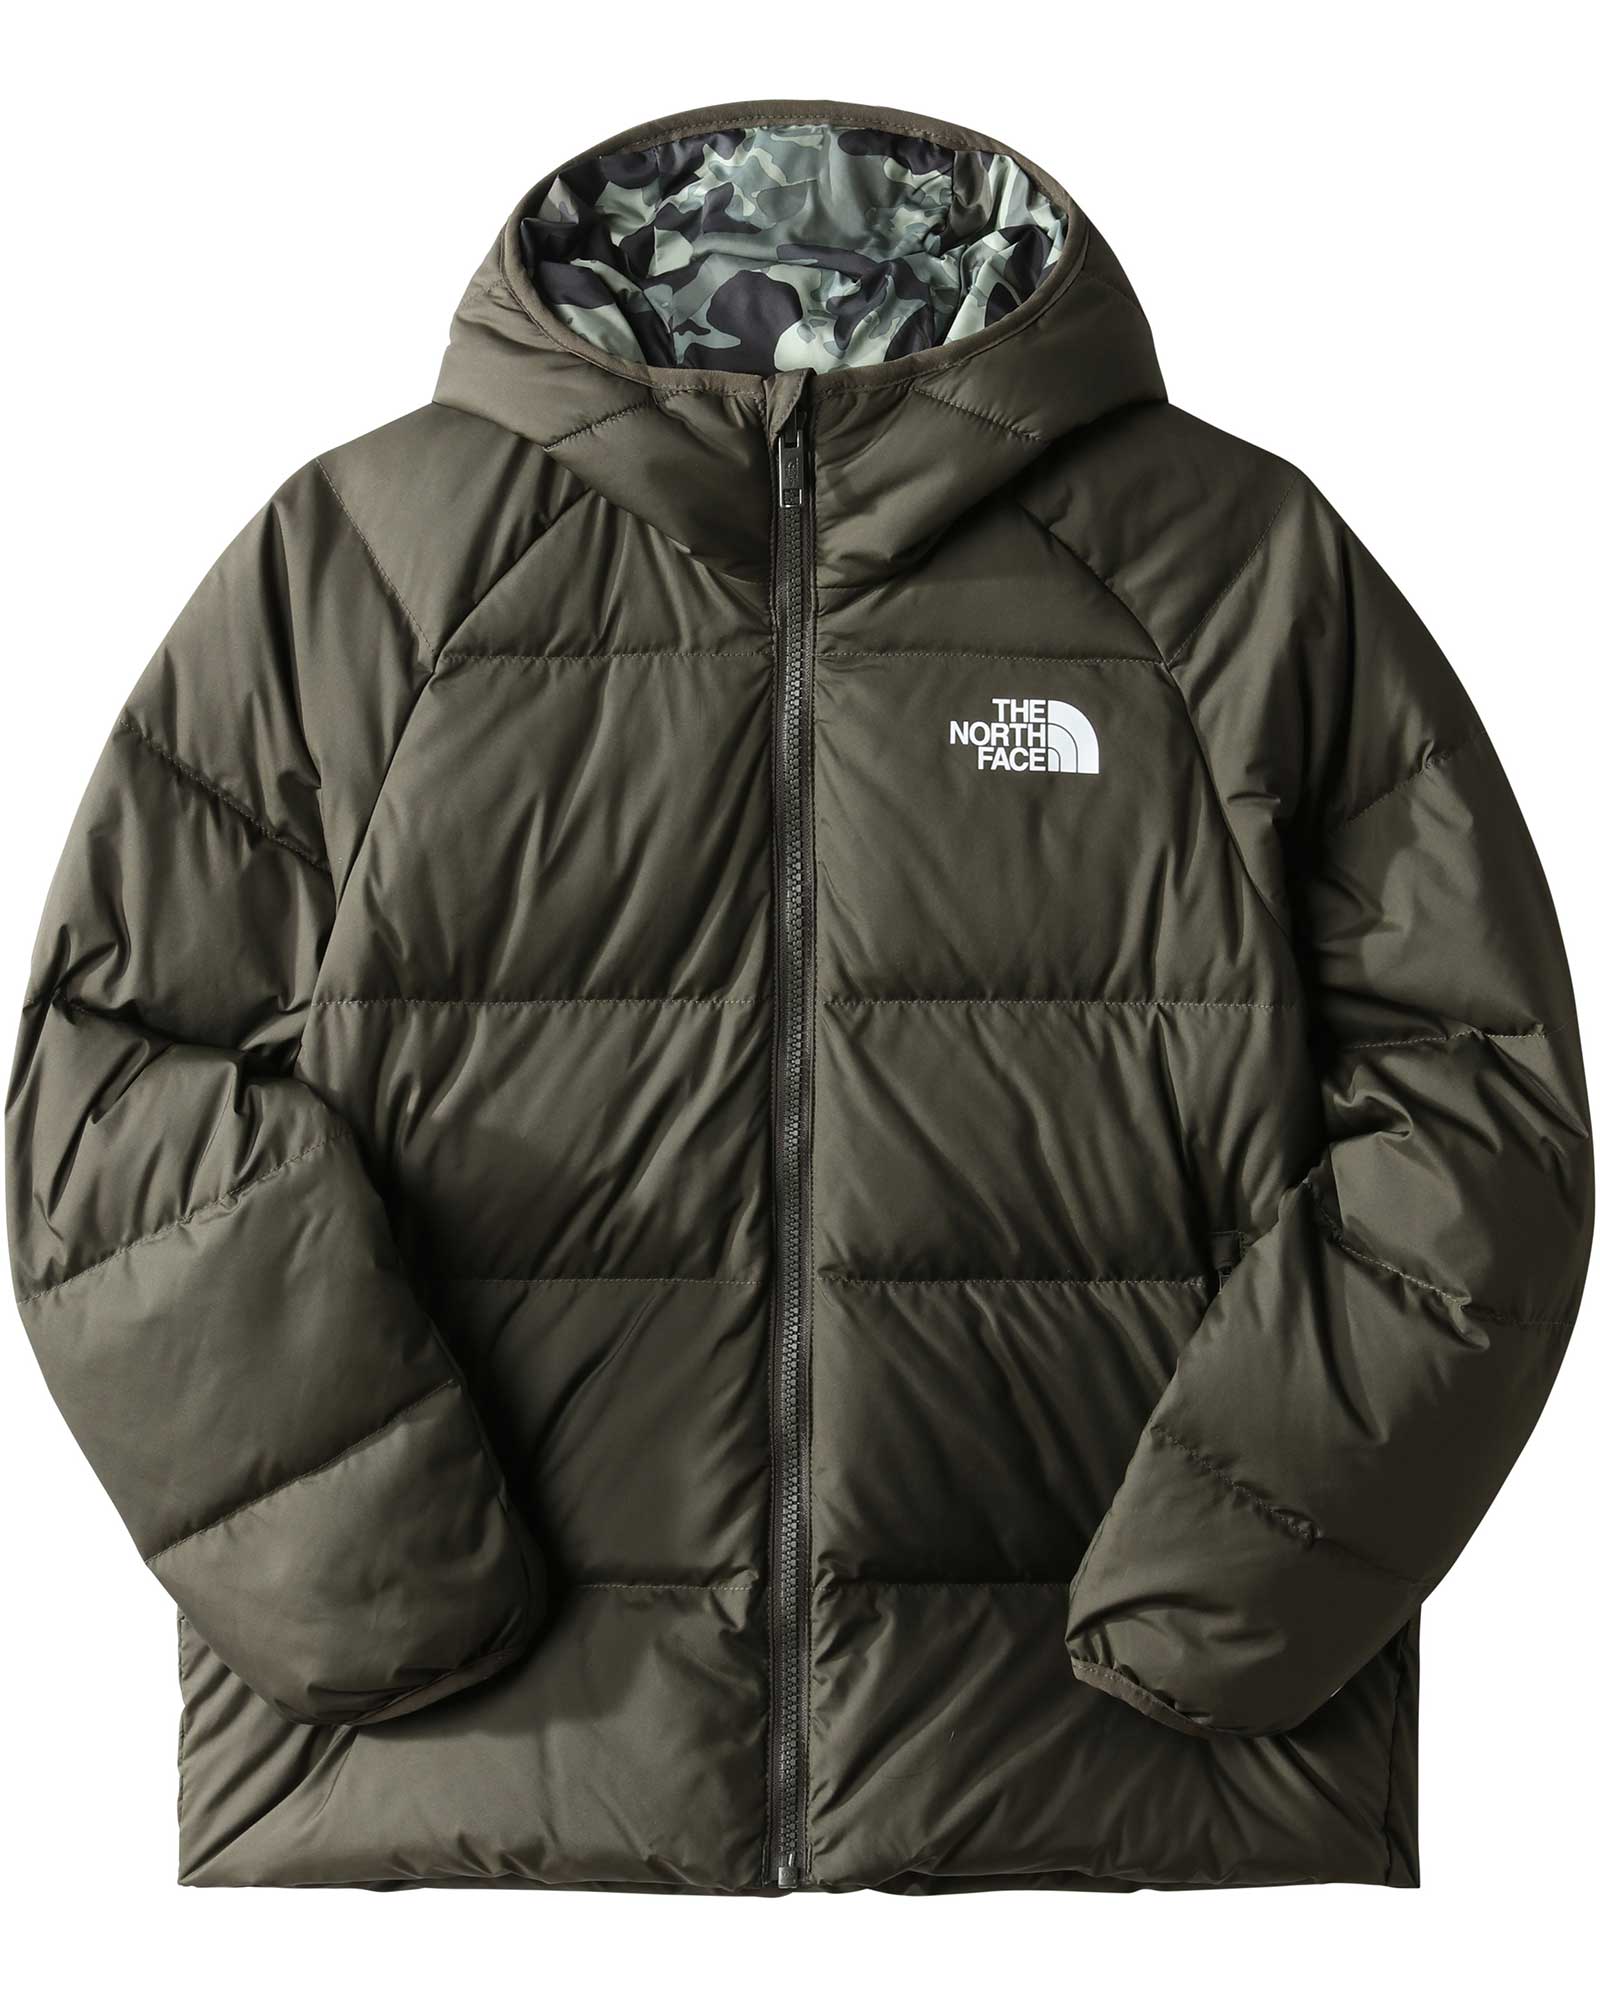 The North Face Print North Kids’ Down Hooded Jacket - New Taupe Green M